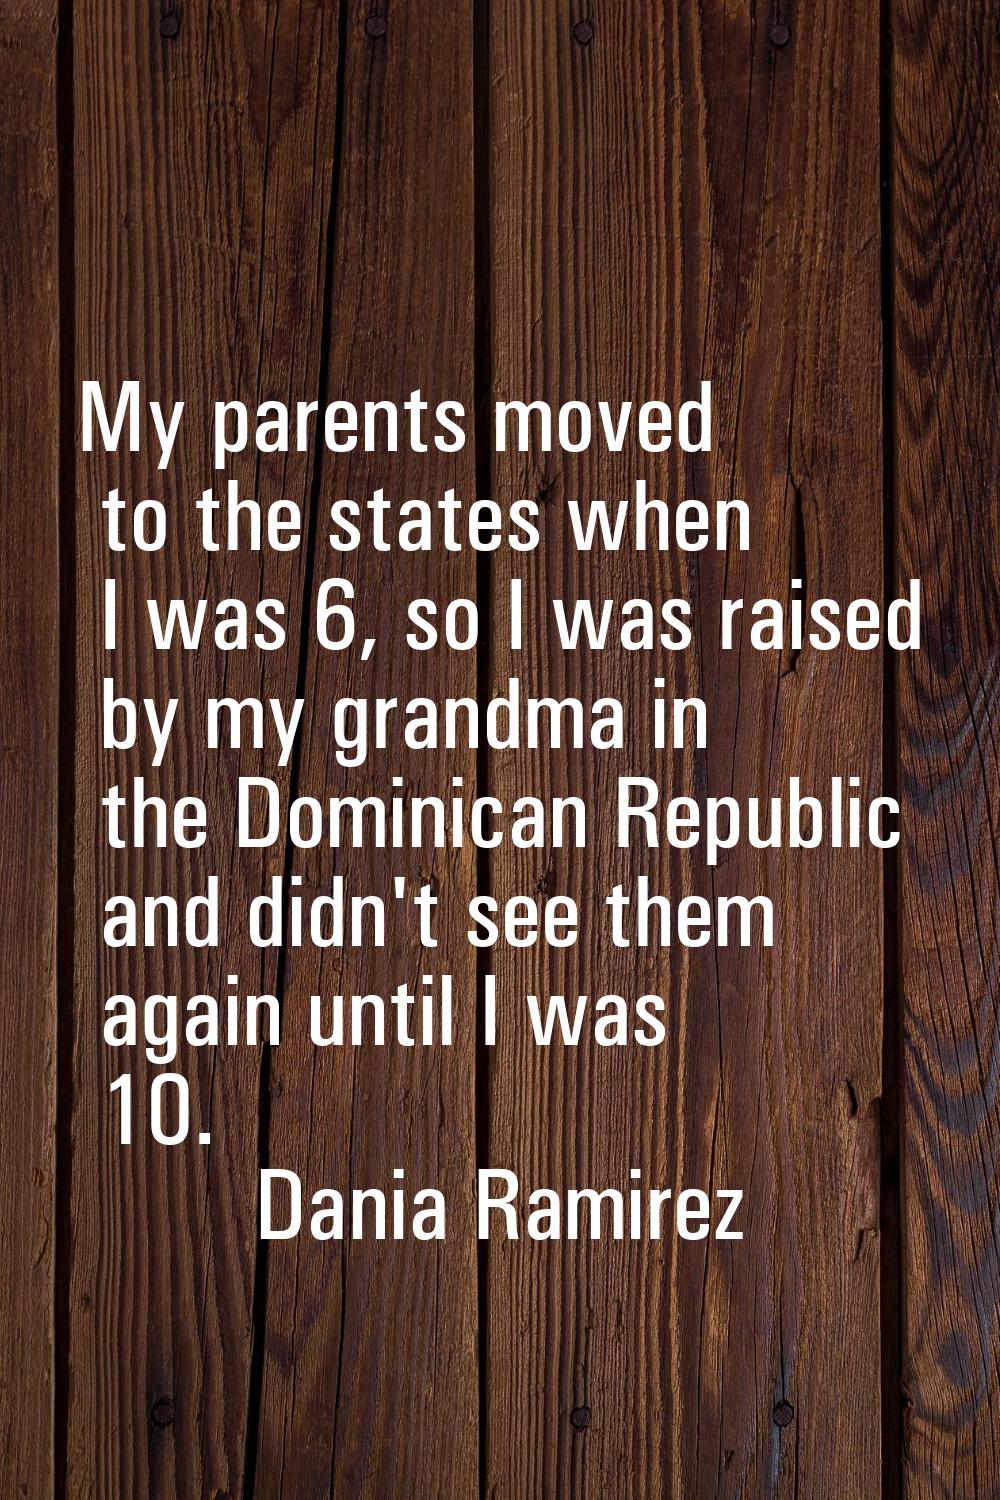 My parents moved to the states when I was 6, so I was raised by my grandma in the Dominican Republi